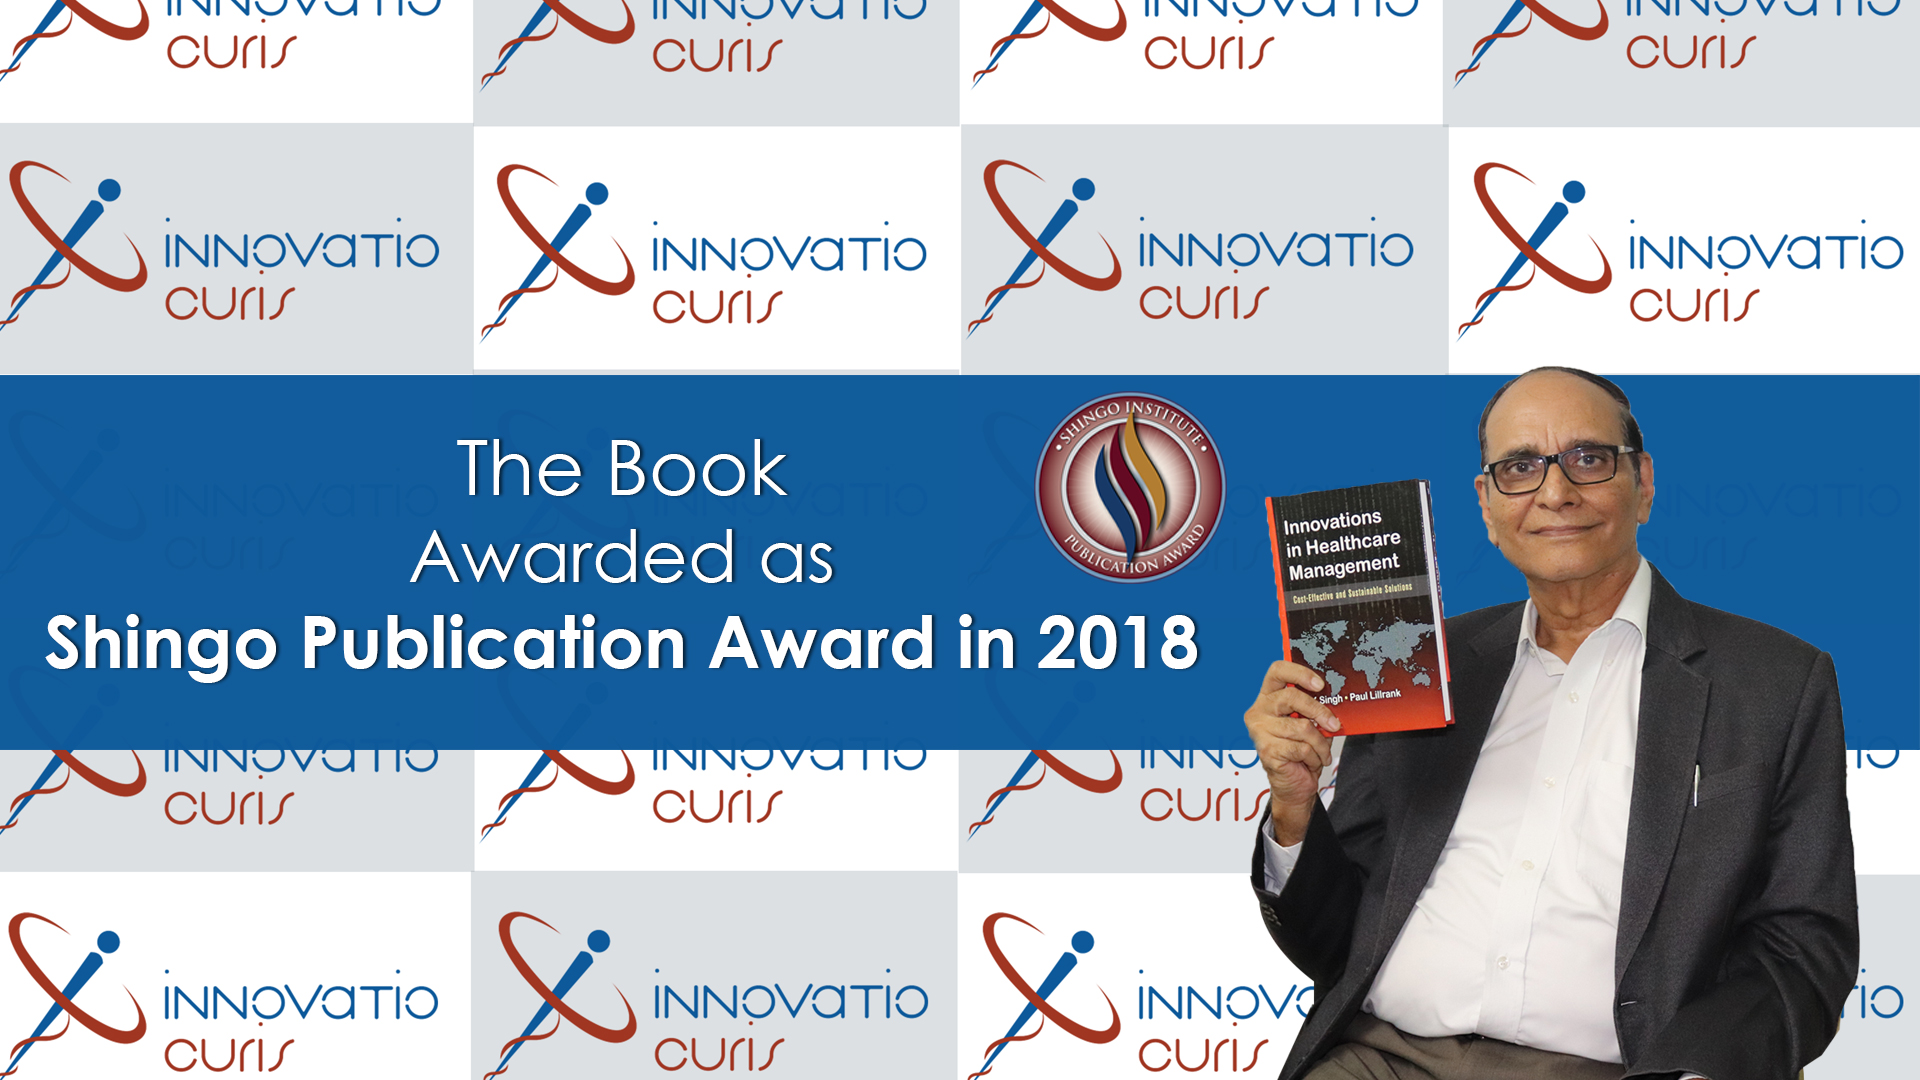 Book innovation in healthcare managment cost effective and sustainable solution written by Dr VK Singh and Prof Paul Lillrank awarded as Shingo Publication Award 2018